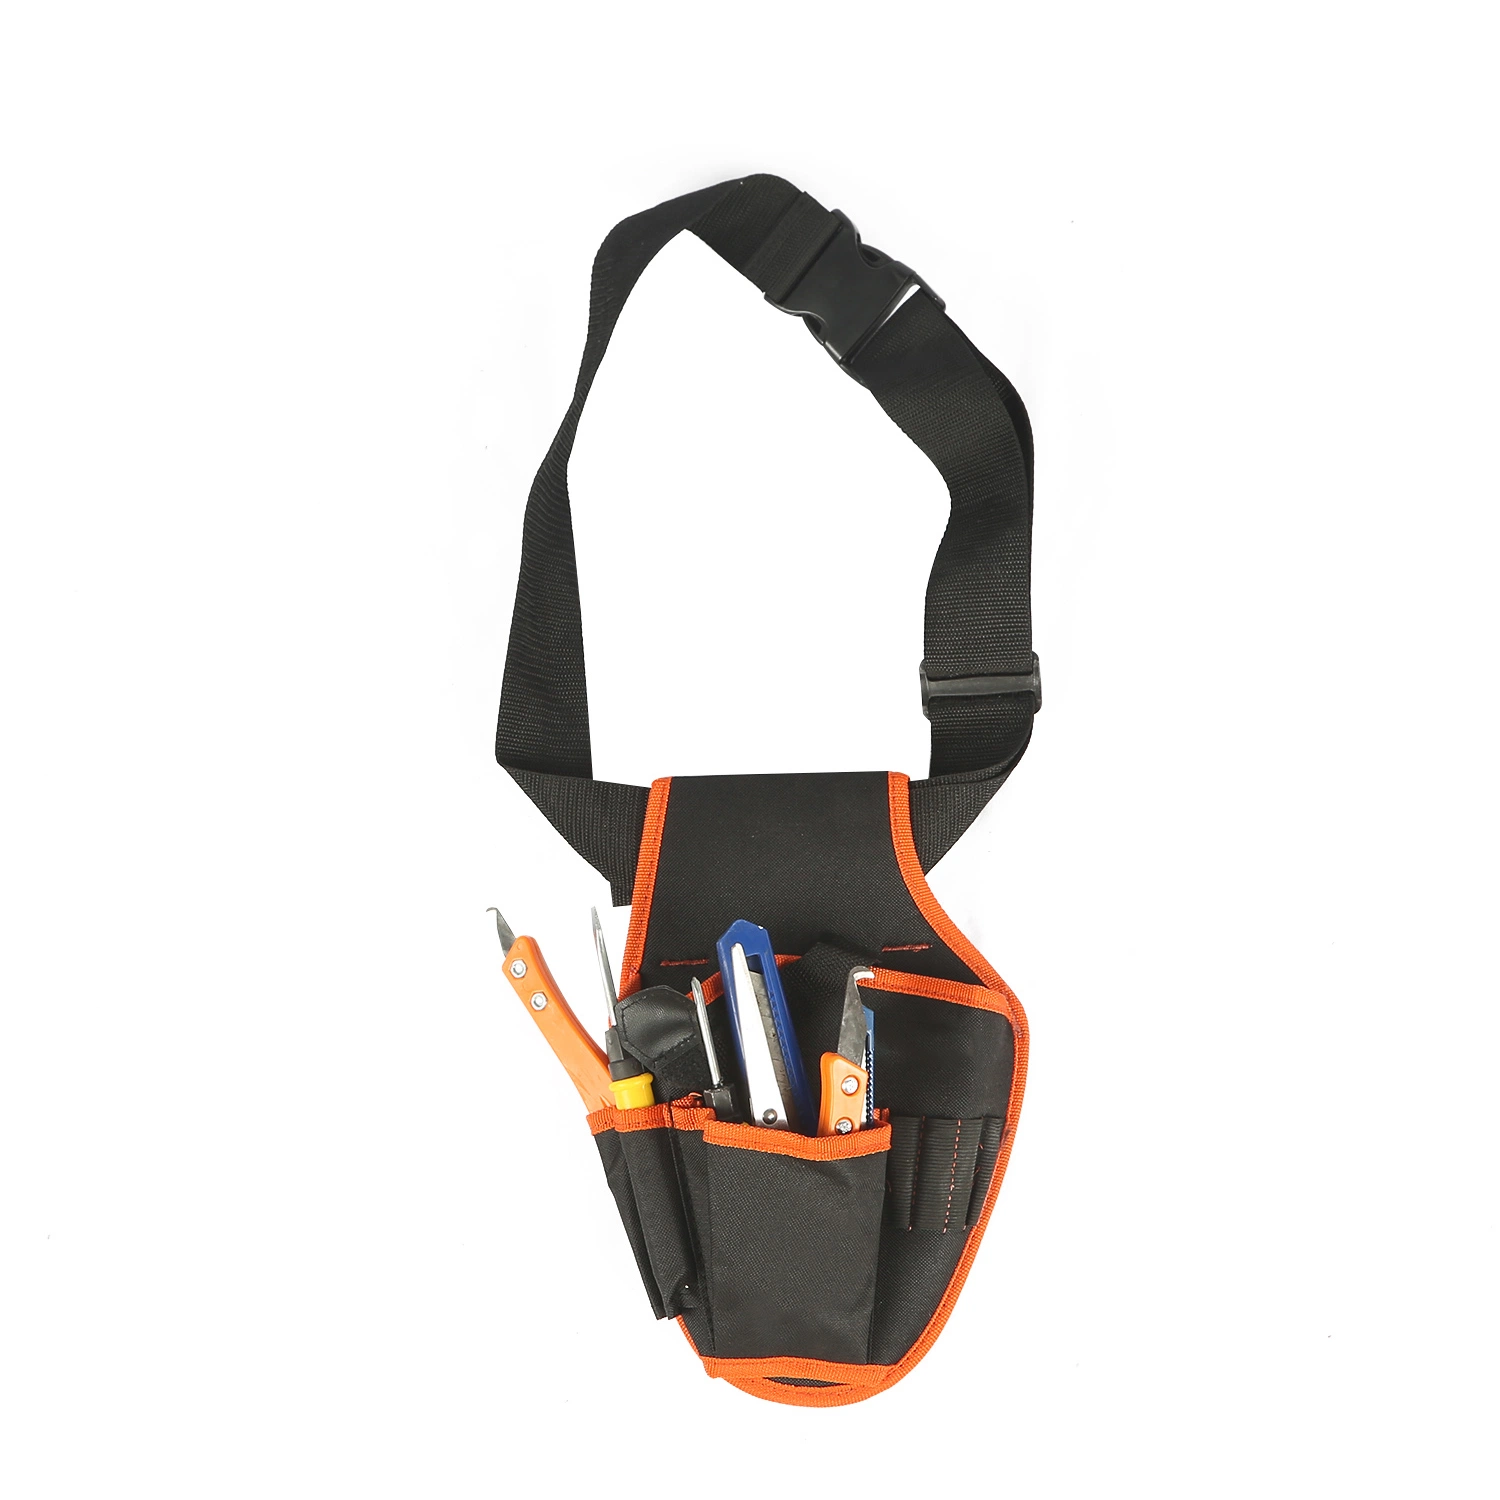 Electrician Outdoor 600d Multifunctional Small Waist Tool Belt Pouch Pocket Bag with Adjustable Waist Strap